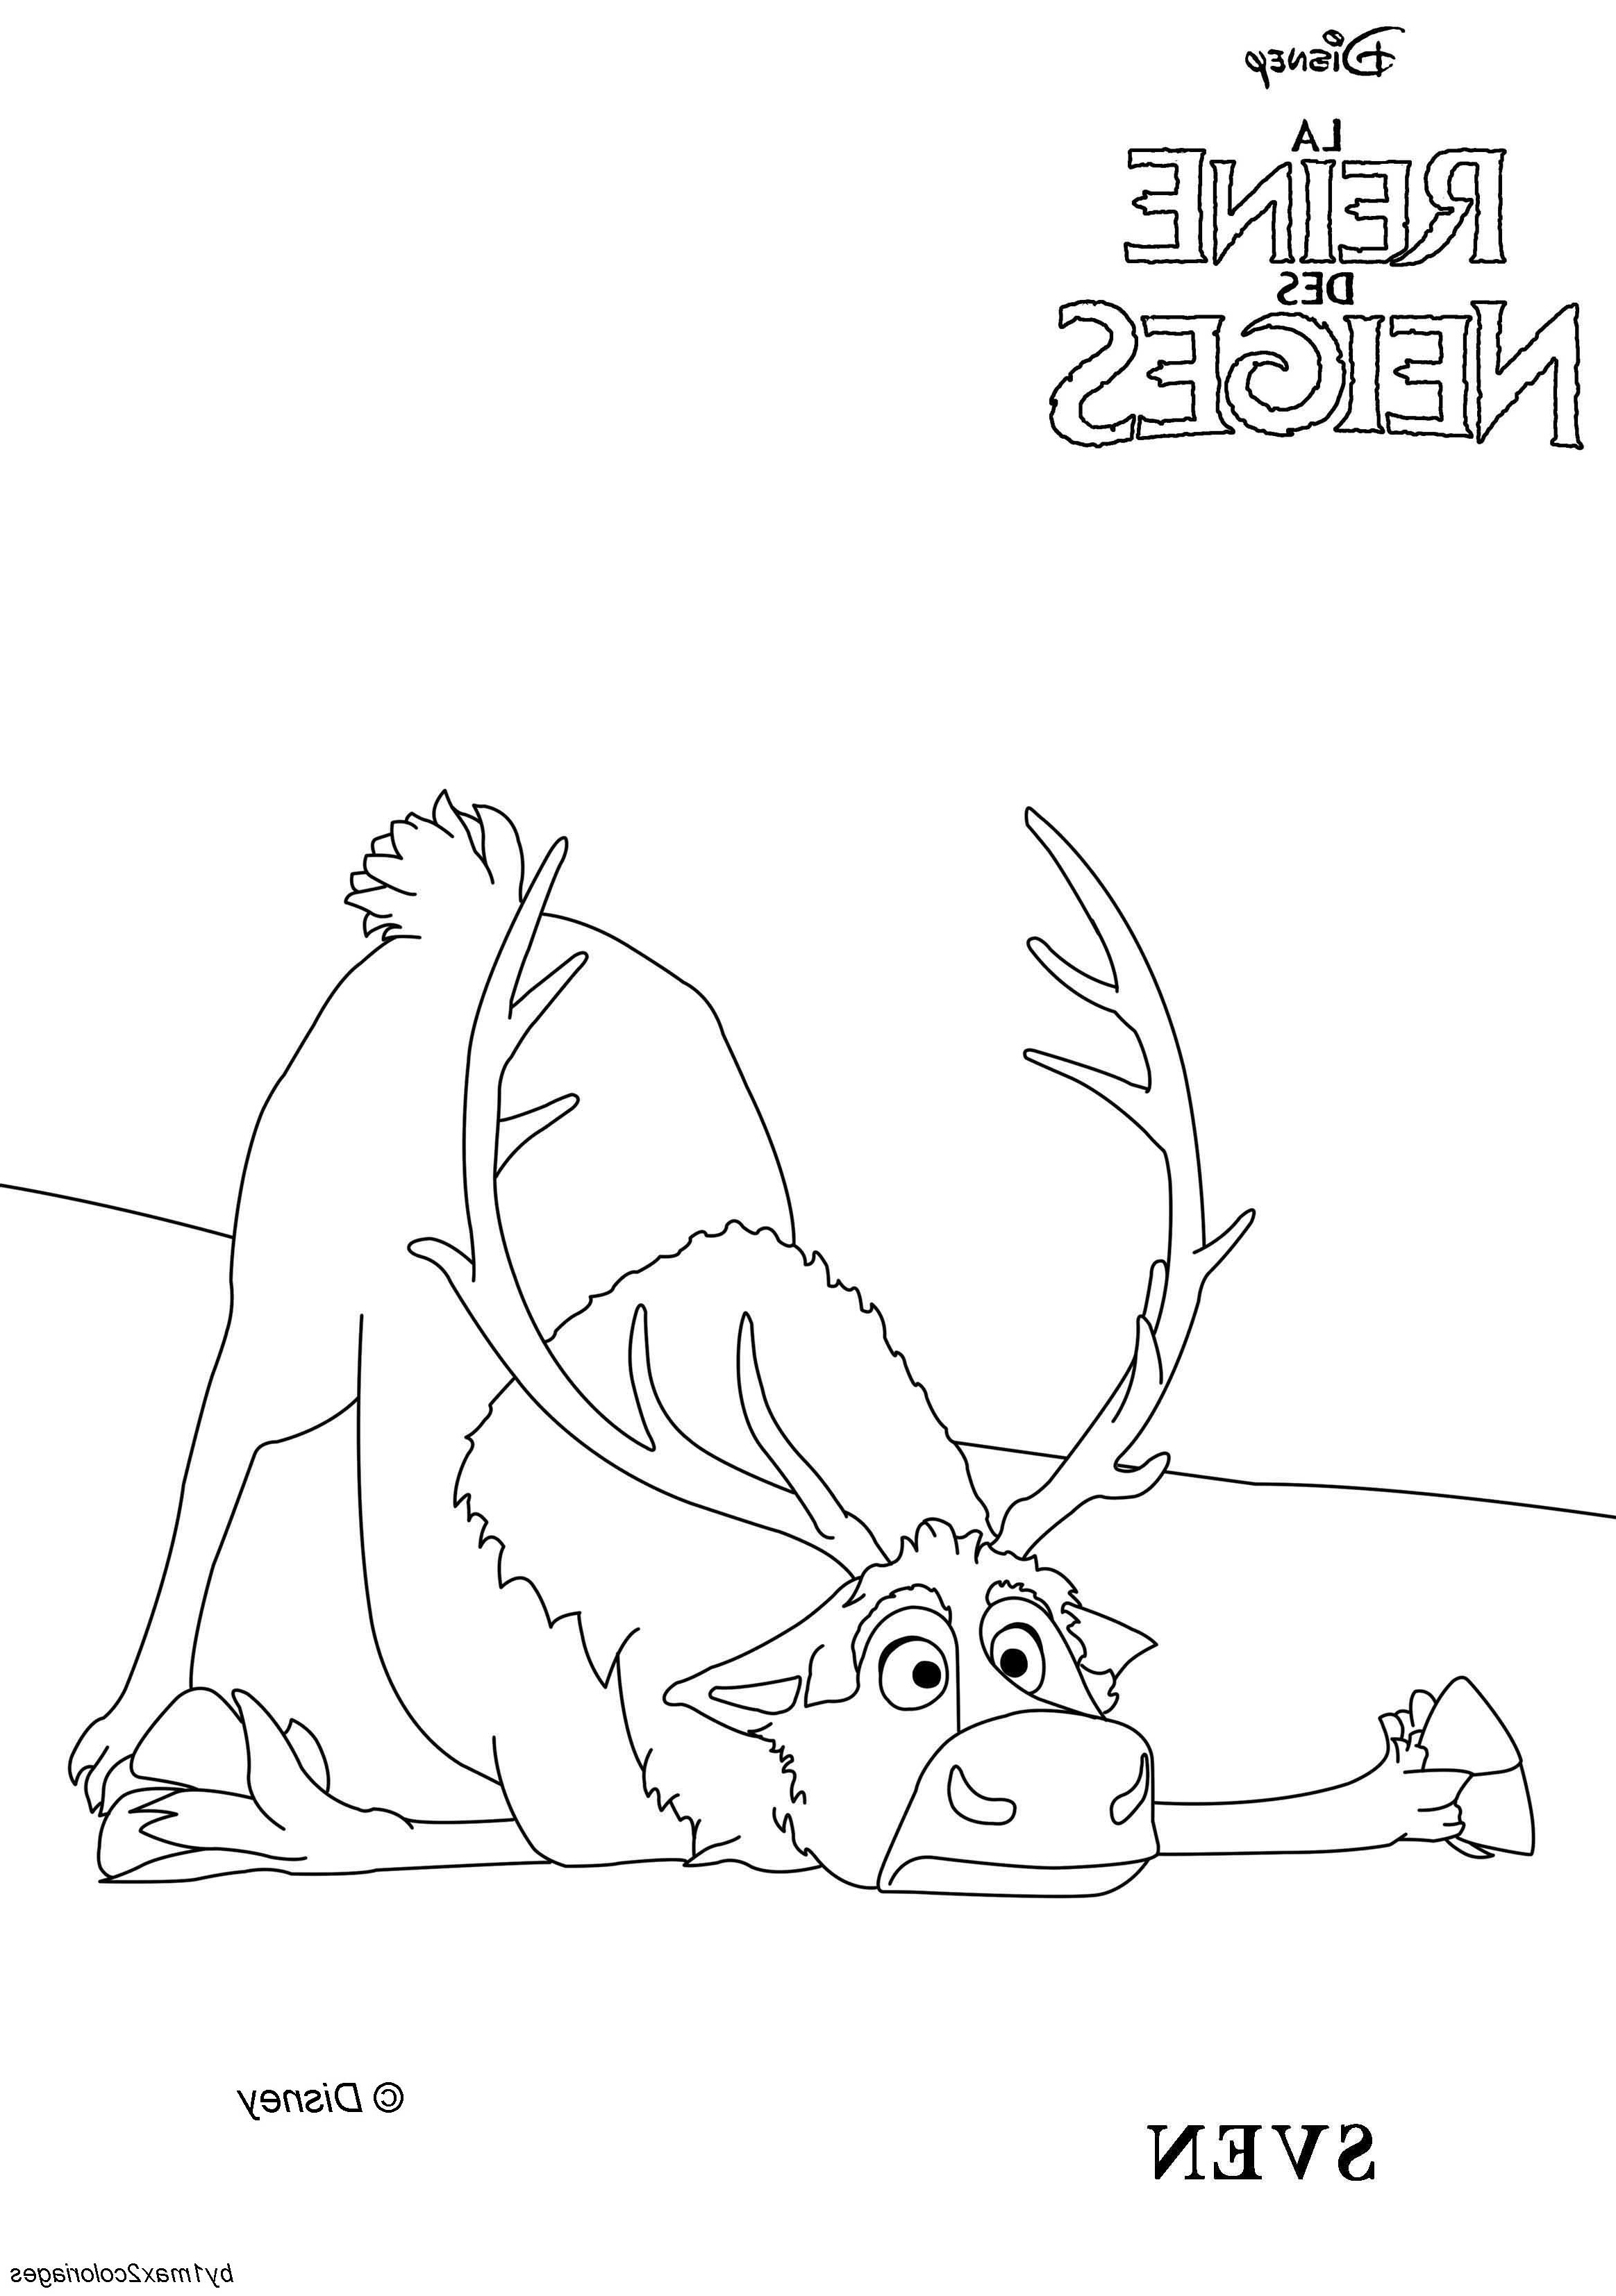 disneys frozen colouring pages